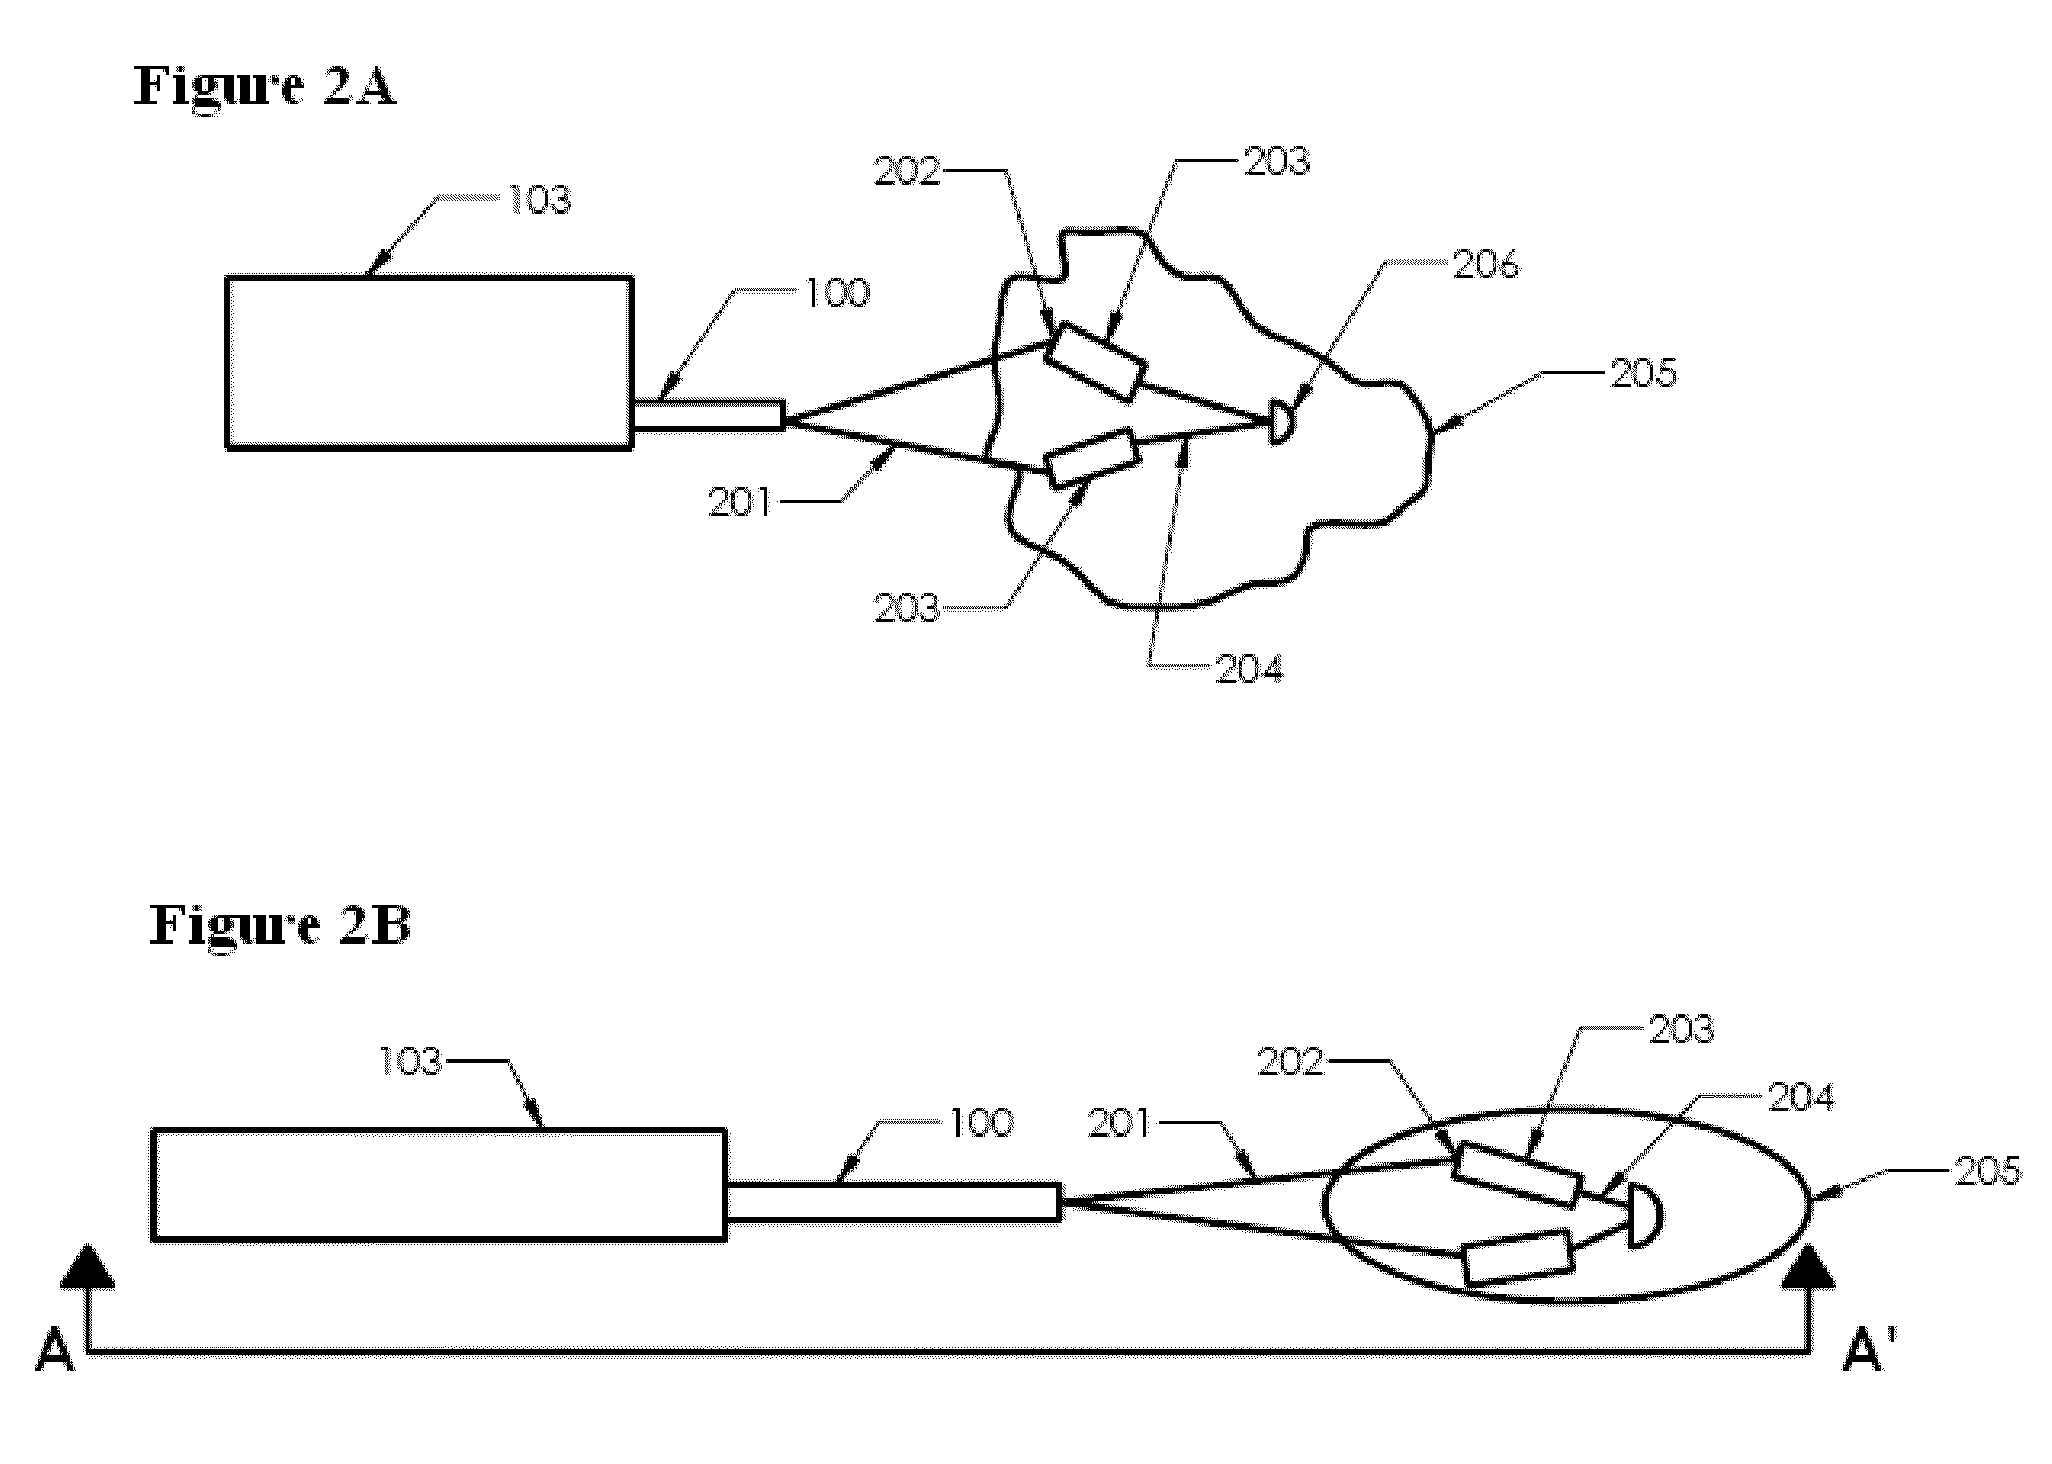 Endoscopic system for lung biopsy and biopsy method of insufflating gas to collapse a lung